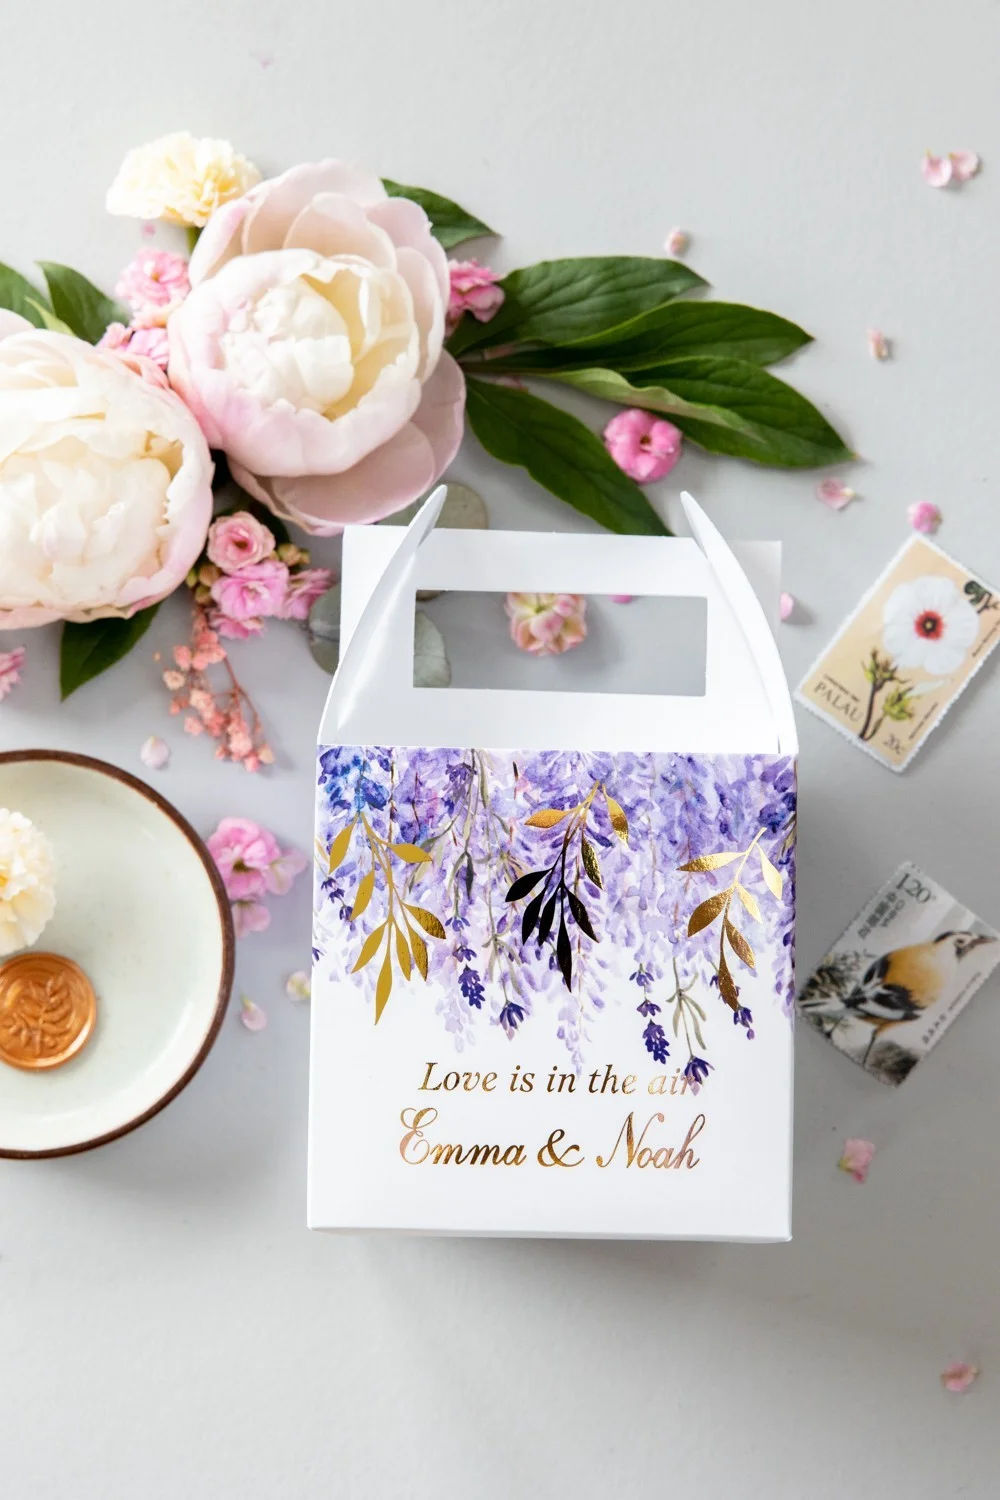 Lavender Personalized Wedding Cake Boxes with Names - Floral Design Favor Containers 